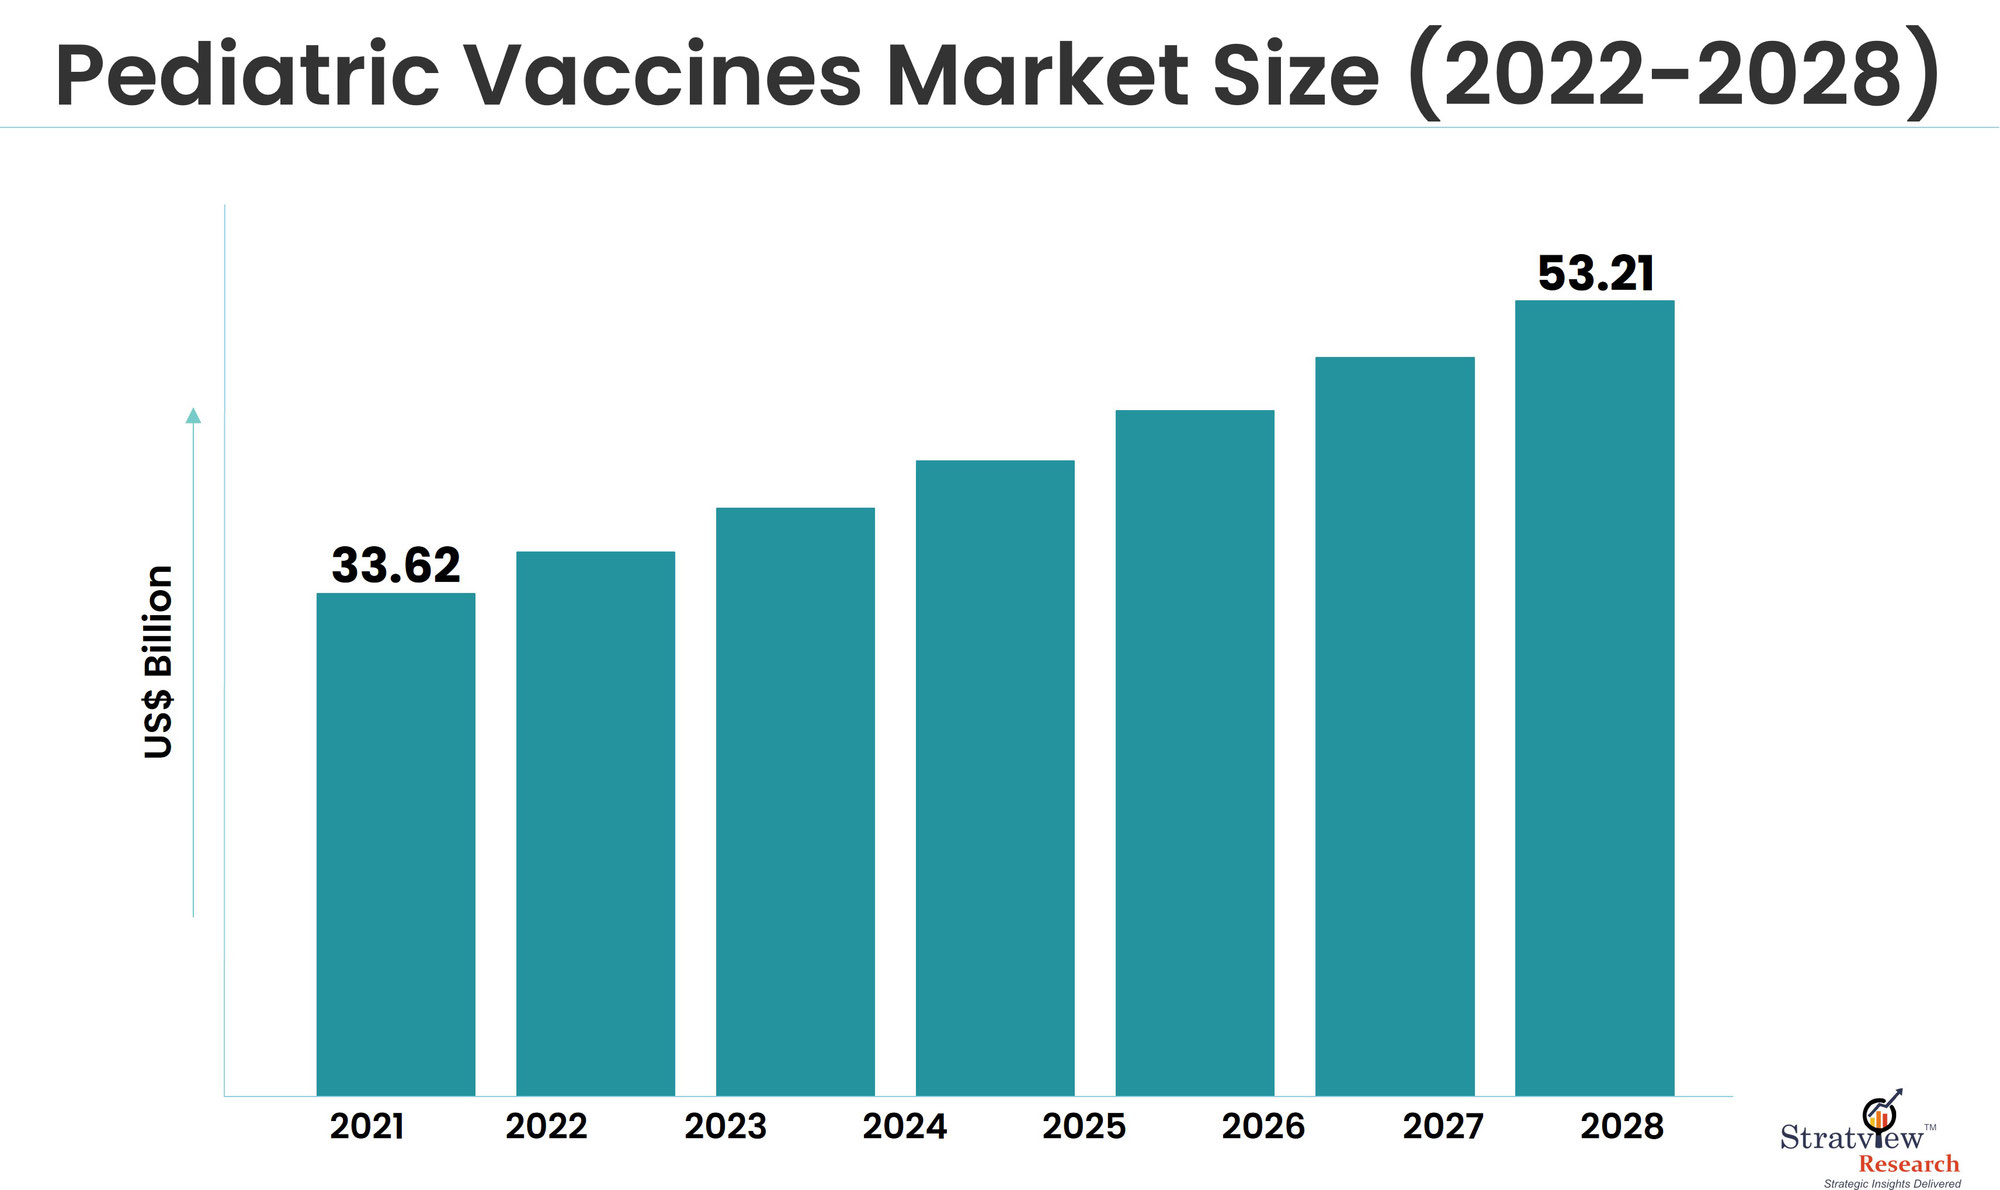 Navigating the Pediatric Vaccines Market: Trends and Insights